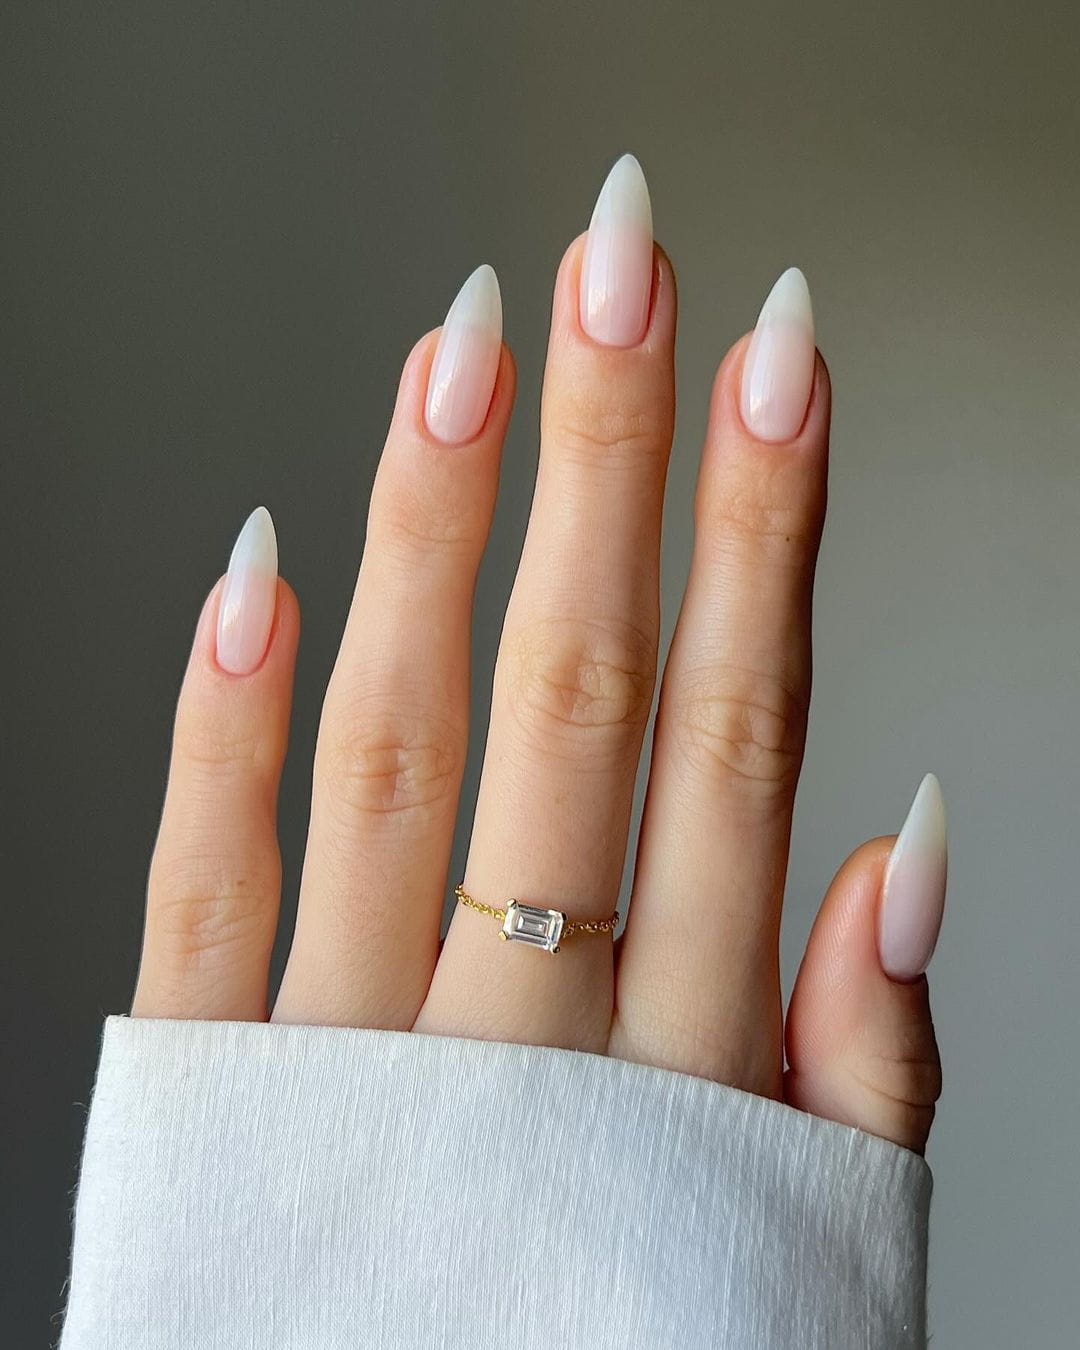 100+ Best Winter Nail Ideas And Designs To Try images 18